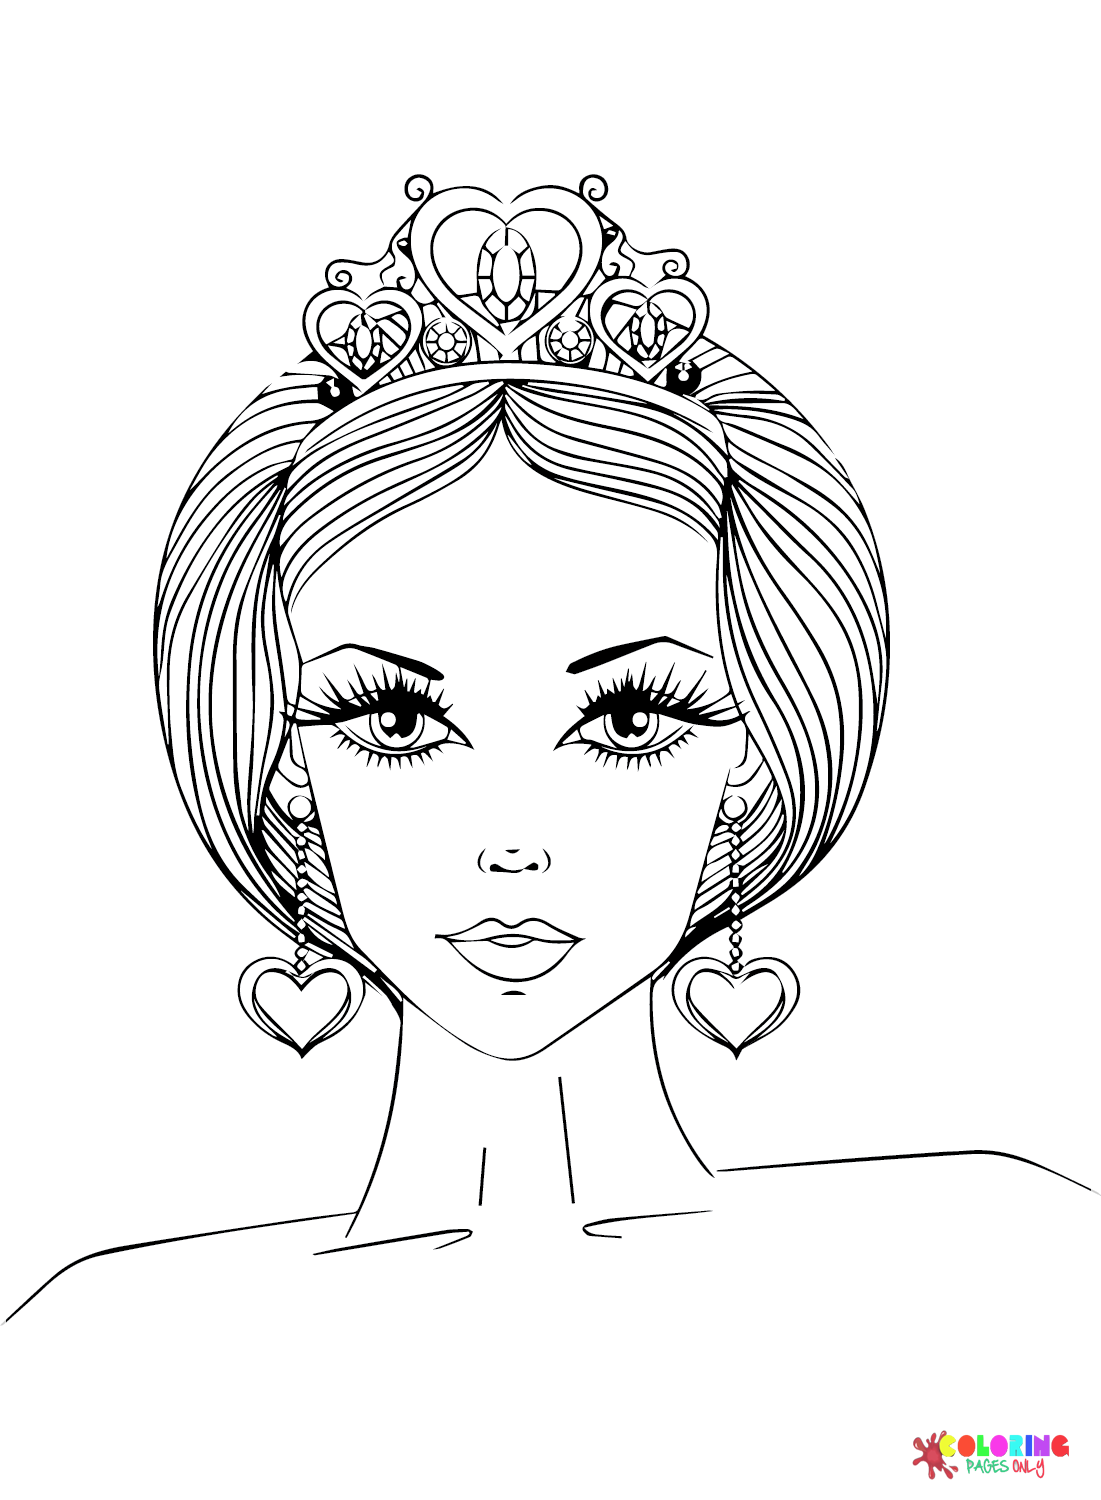 Queen Images Coloring Page